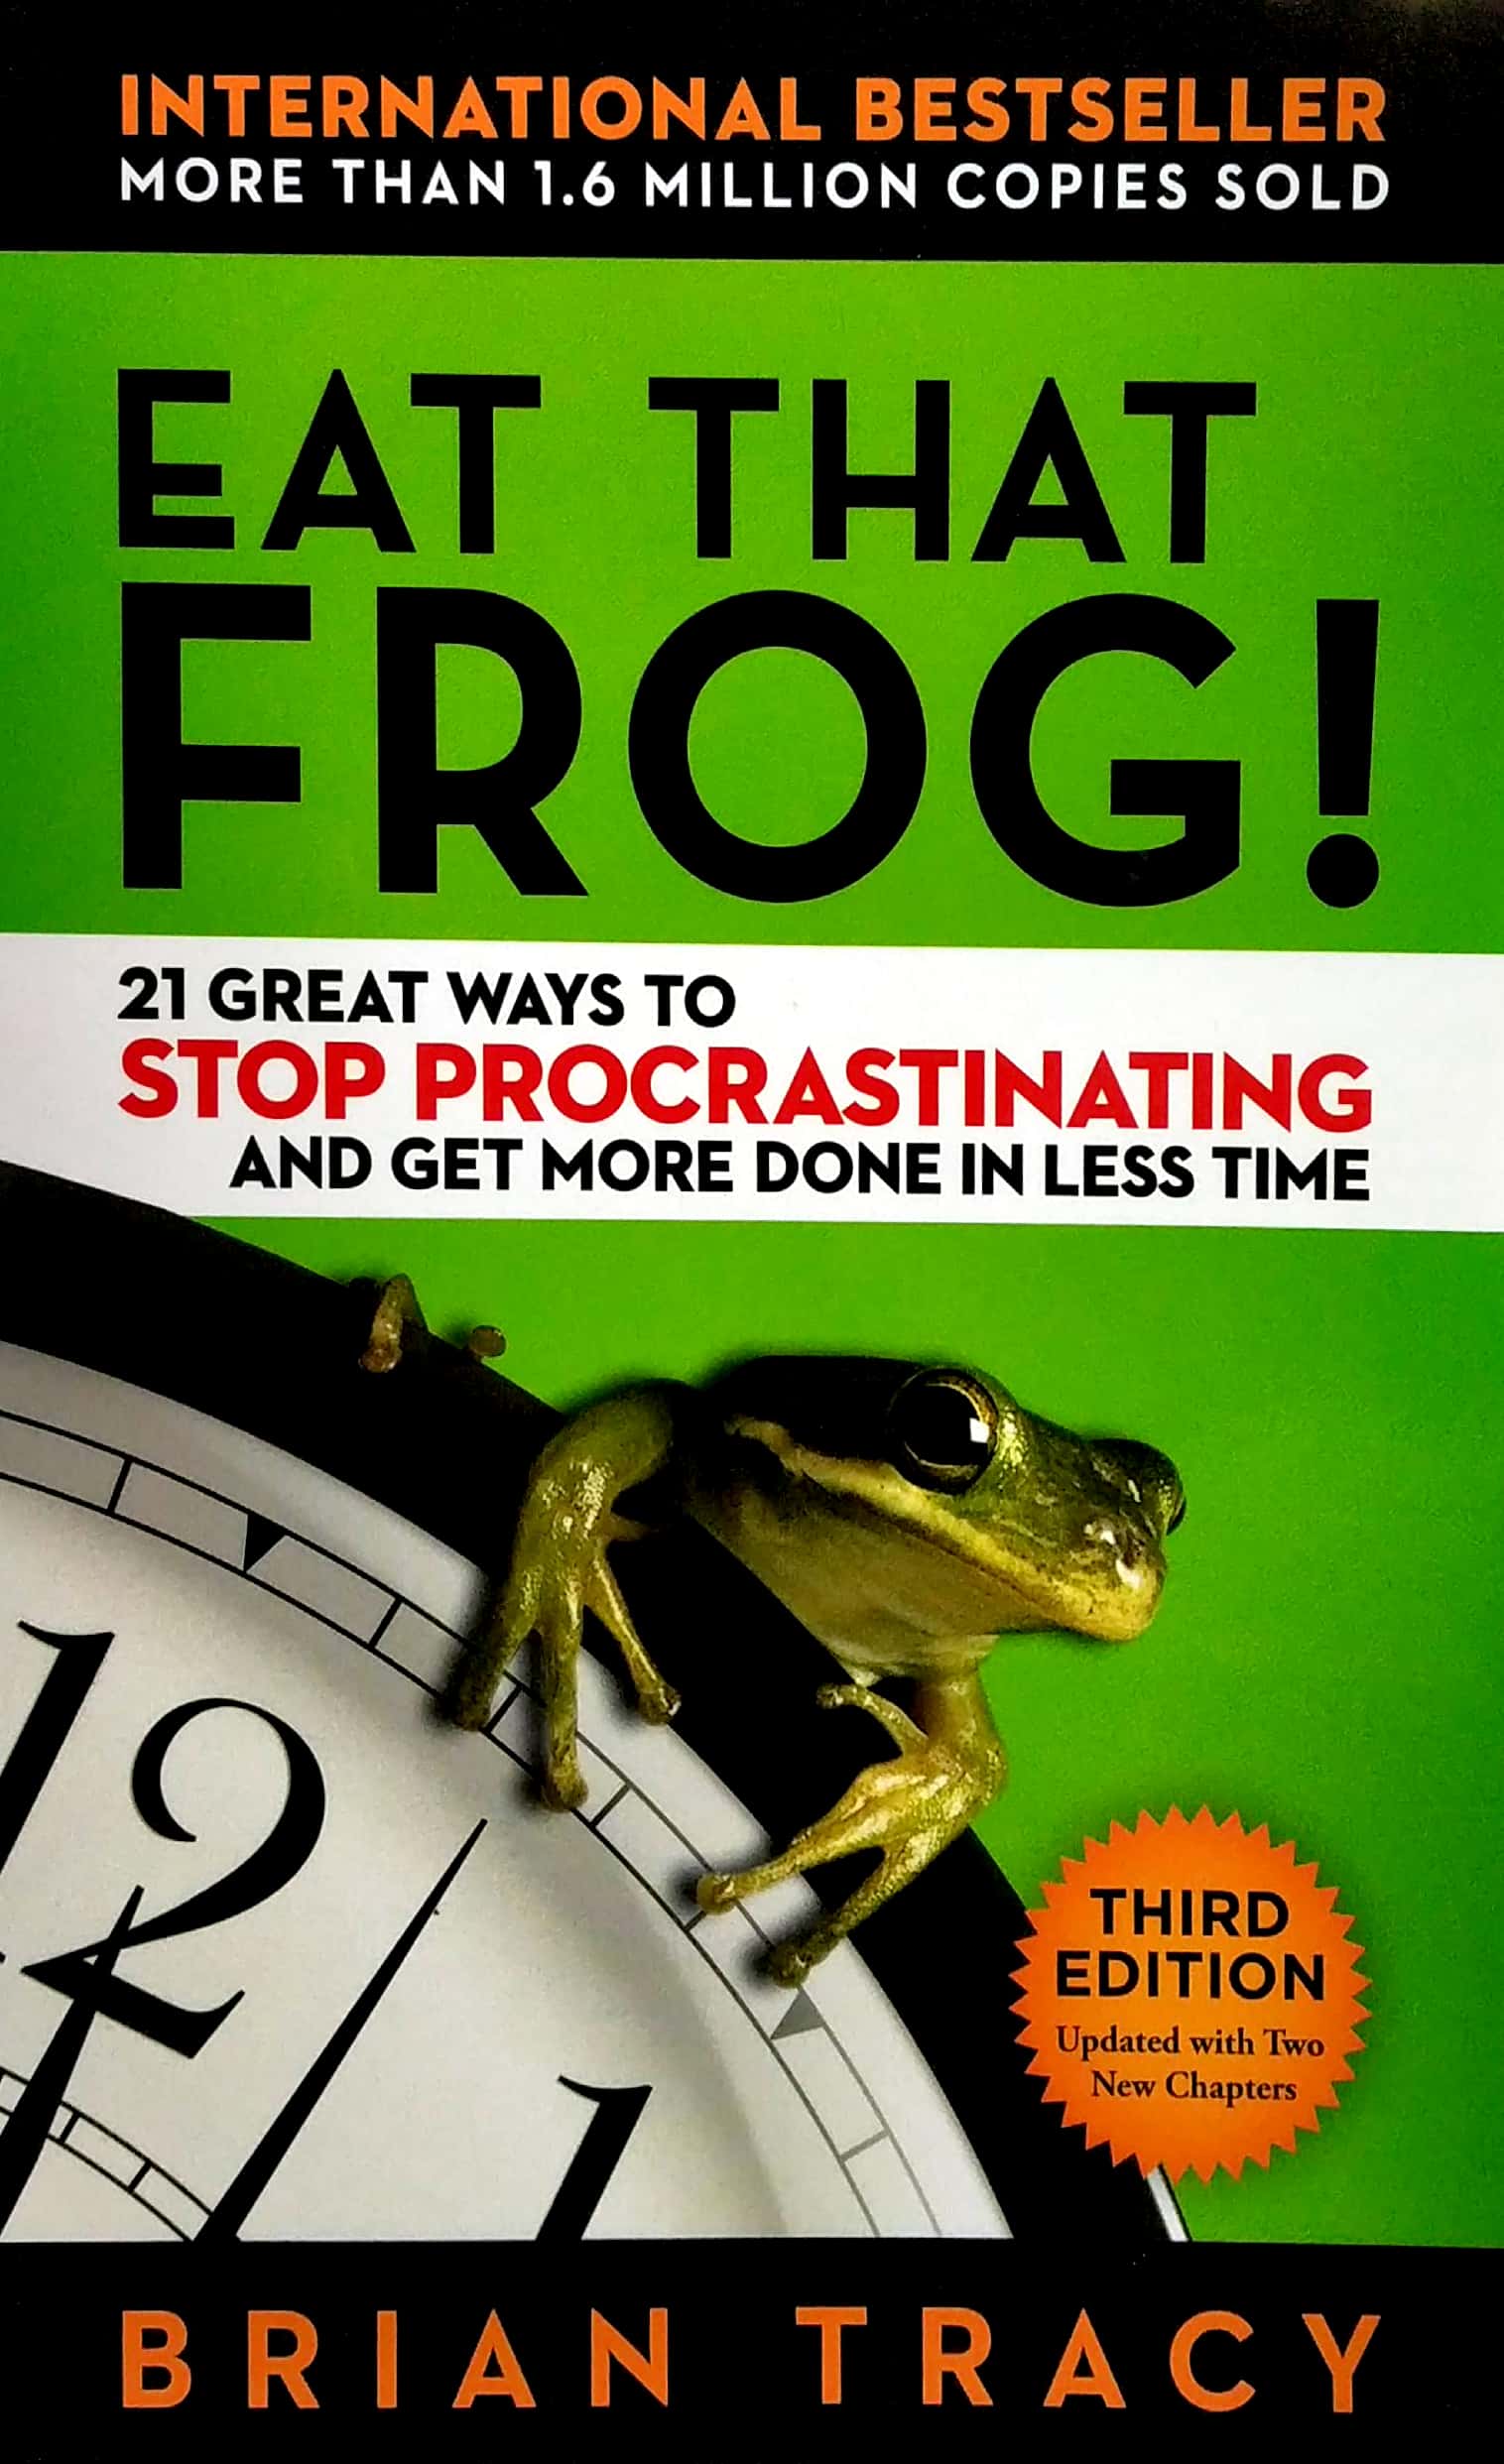 Eat That Frog!: 21 Great Ways to Stop Procrastinating and Get More Done in Less Time Book by Brian Tracy